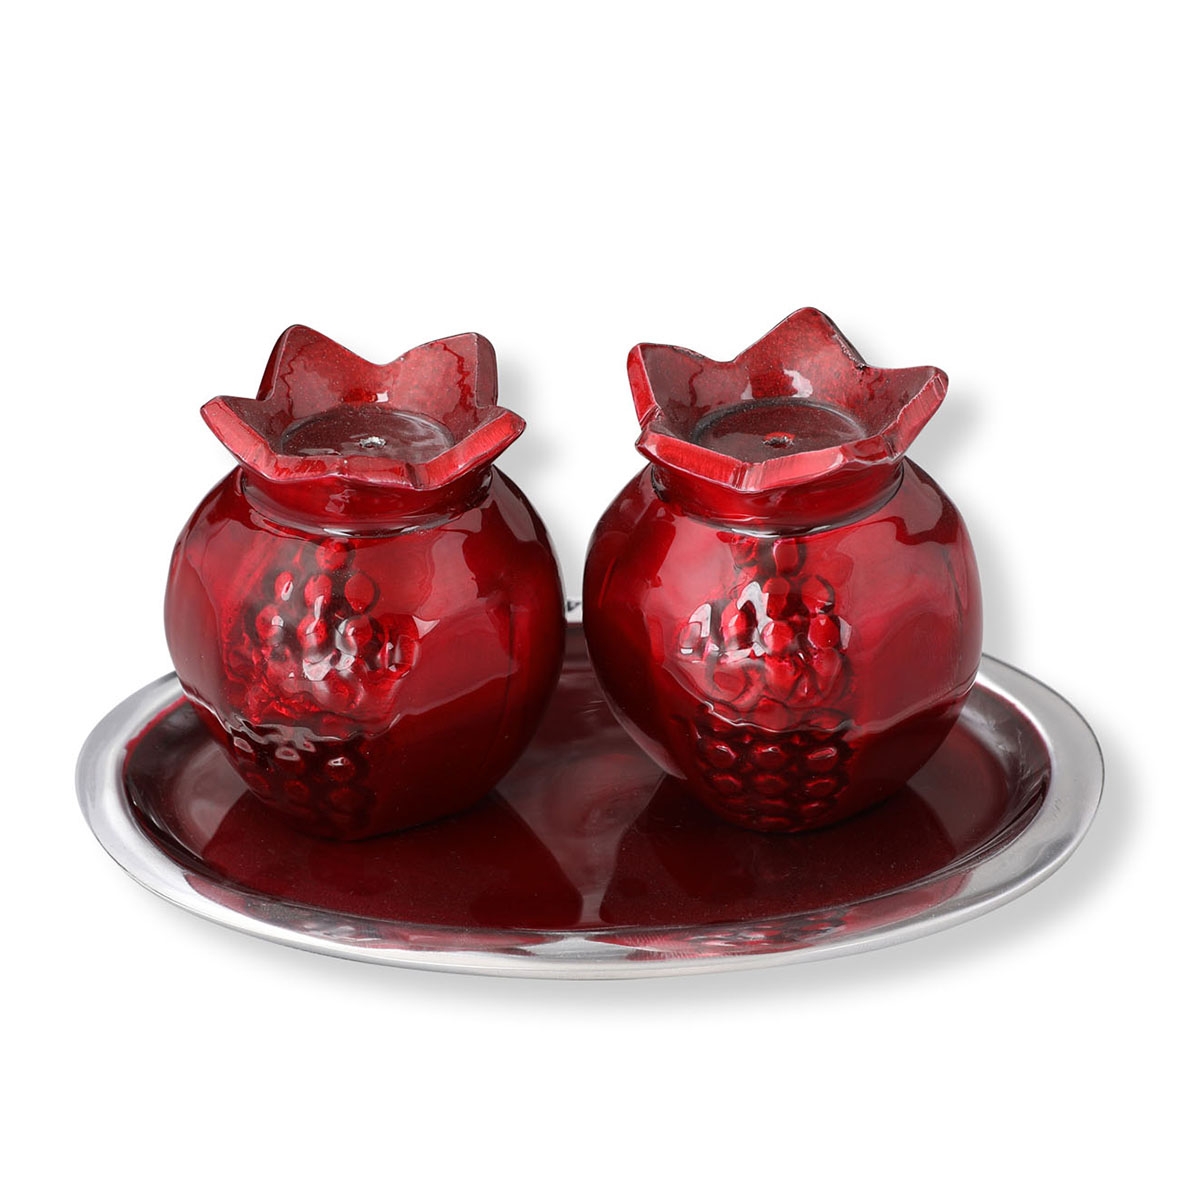 Pomegranate Salt and Pepper Shakers - 1